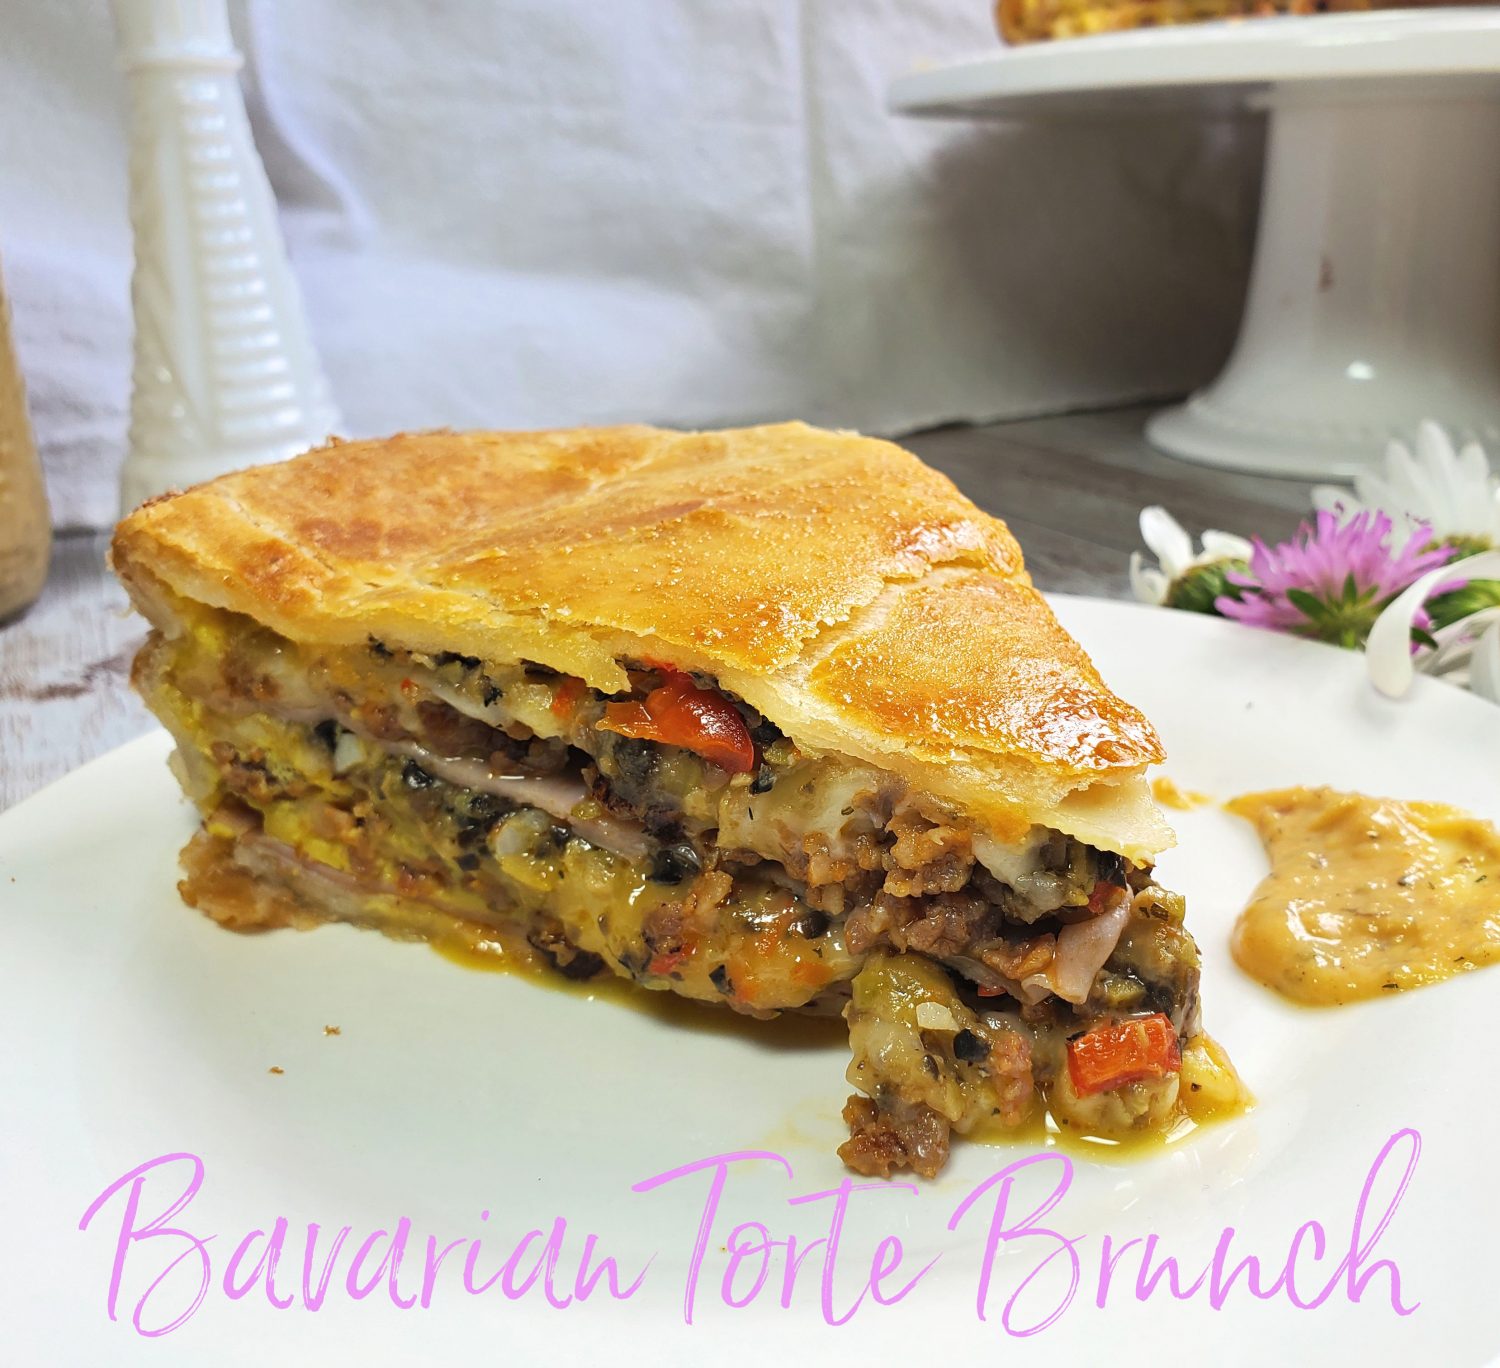 Bavarian Brunch Torte: A taste of Bavaria in a German inspired torte with smoky gouda, provolone, parmesan, honey ham, and homemade olive tapenade.